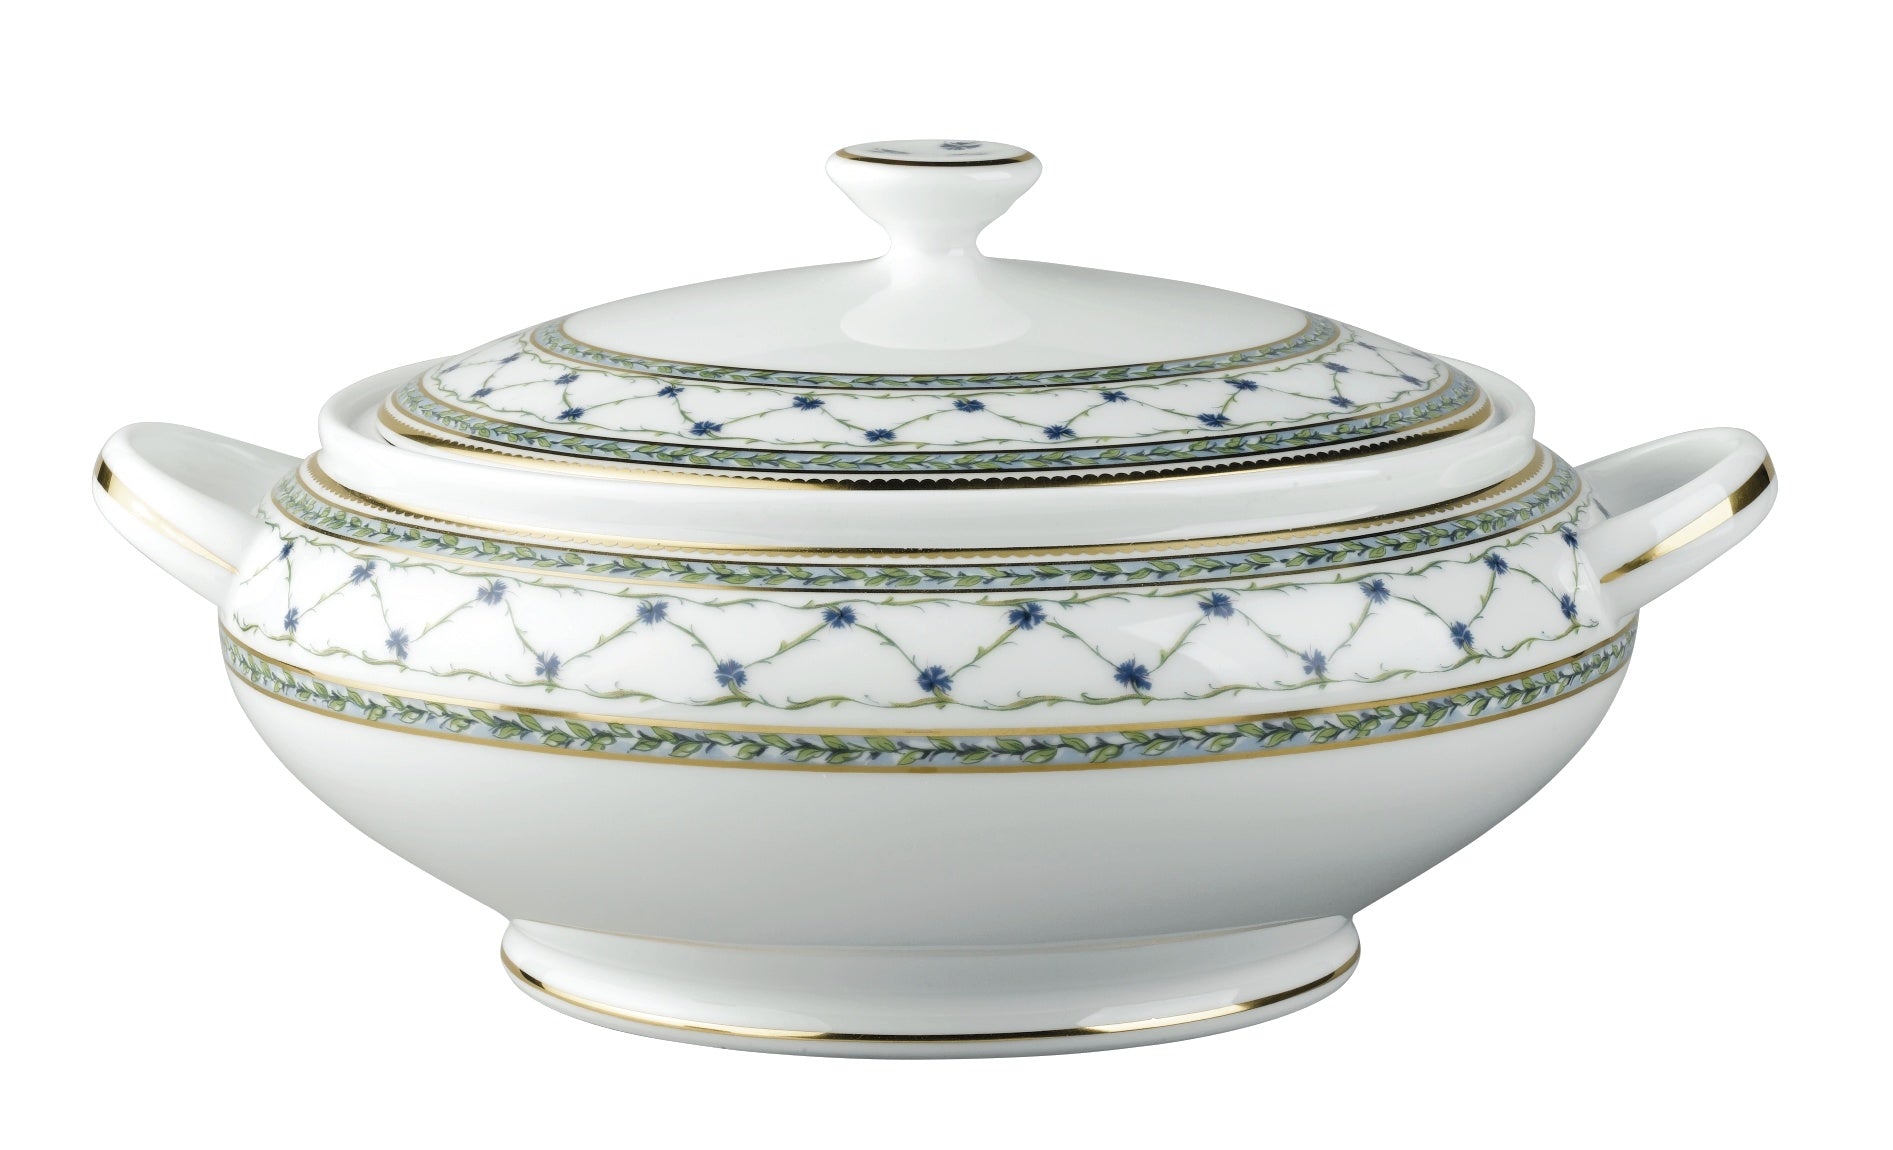 Allee Royale - Covered Vegetable Dish 7.1 in 33.8 oz